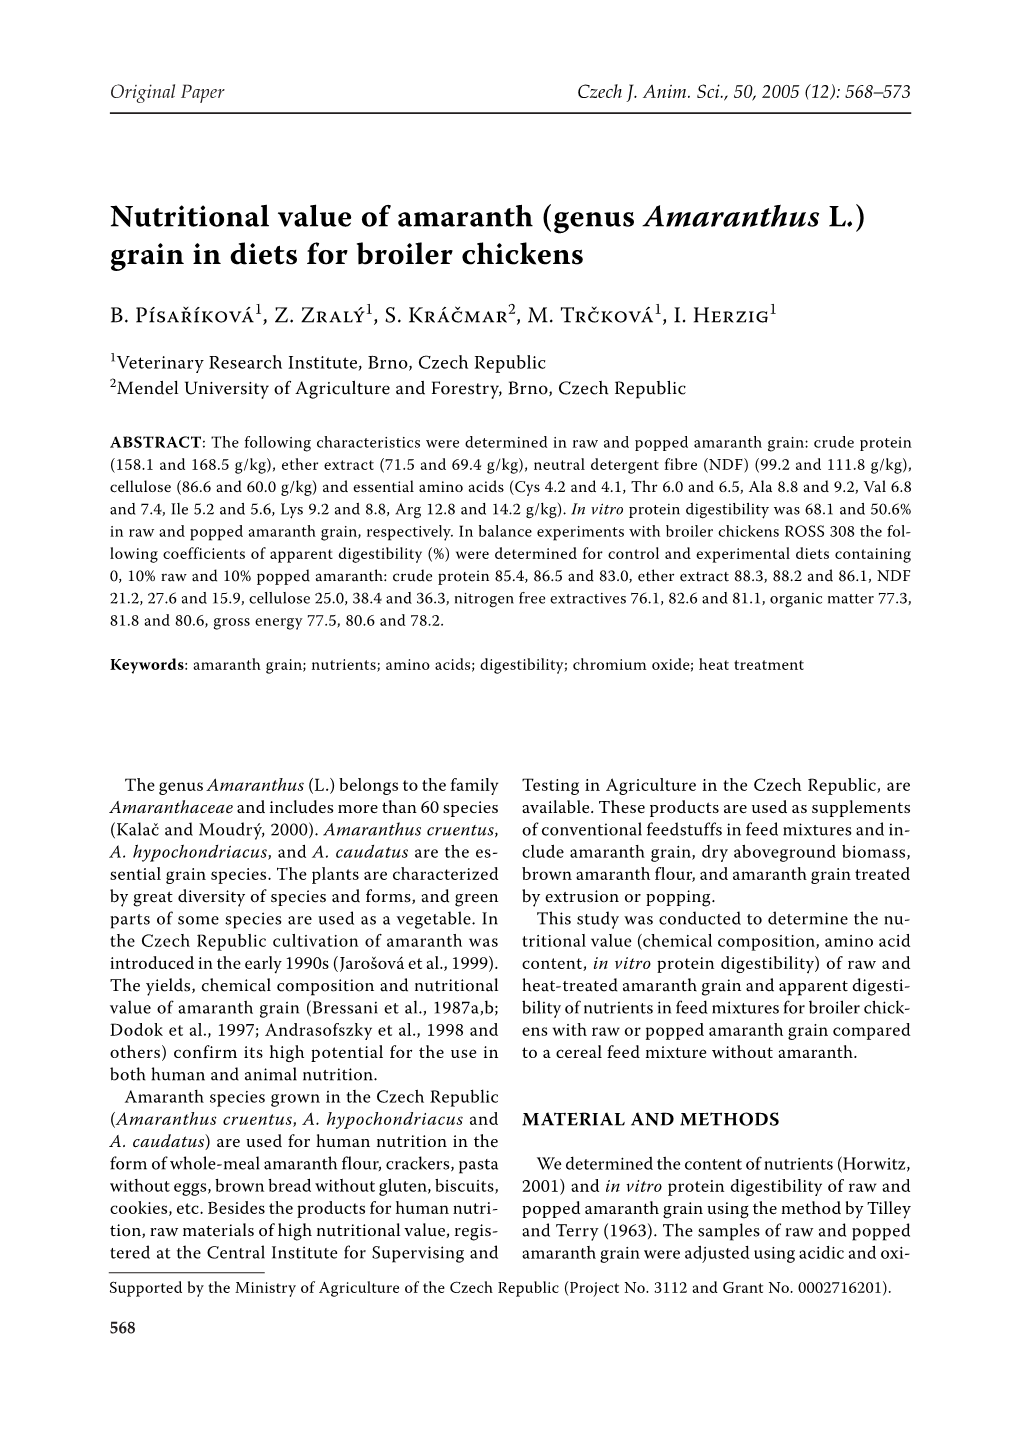 Nutritional Value of Amaranth (Genus Amaranthus L.) Grain in Diets for Broiler Chickens